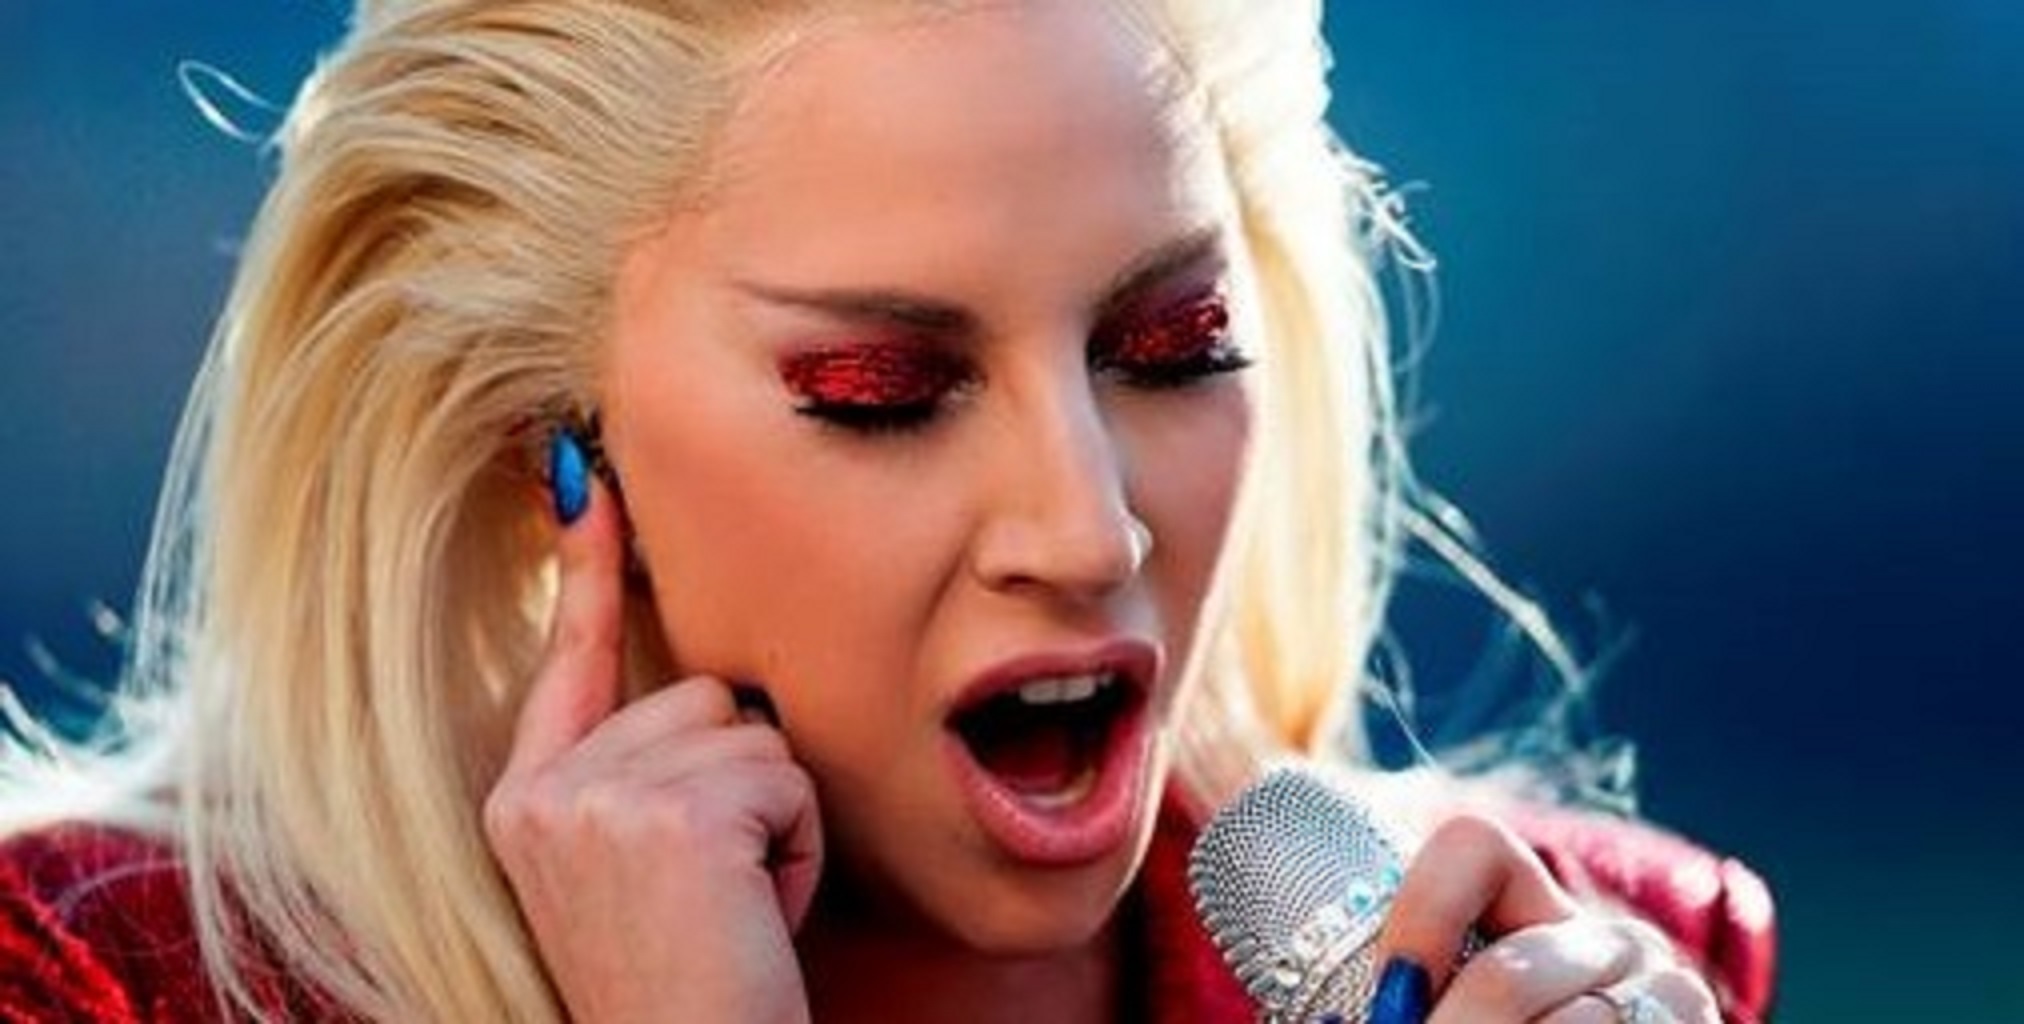 10 Performances That Prove Lady Gaga Has One of The Best Voices in Music Today!